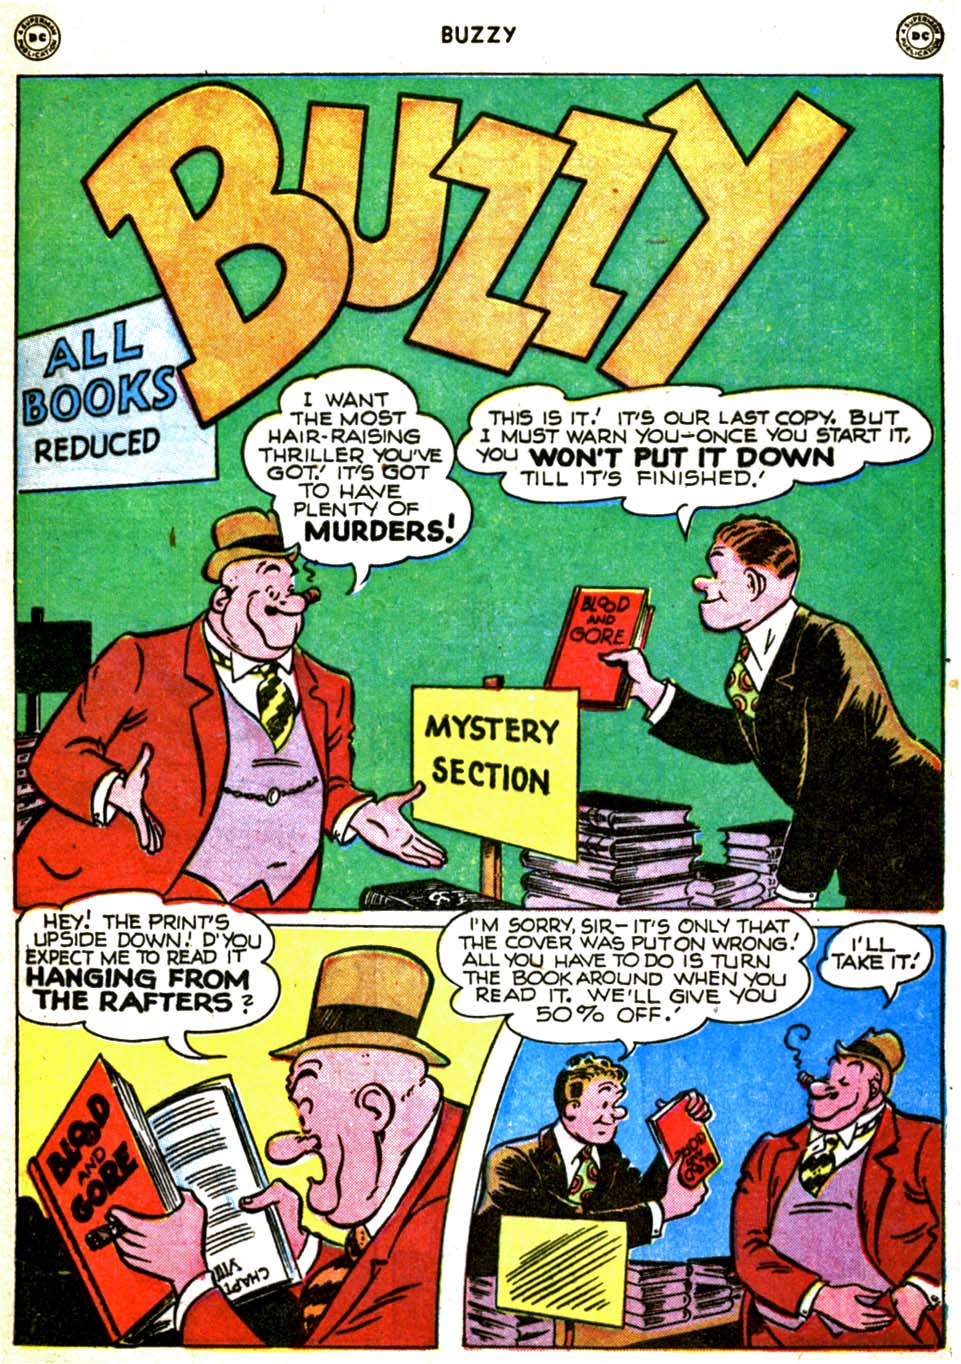 Read online Buzzy comic -  Issue #20 - 11